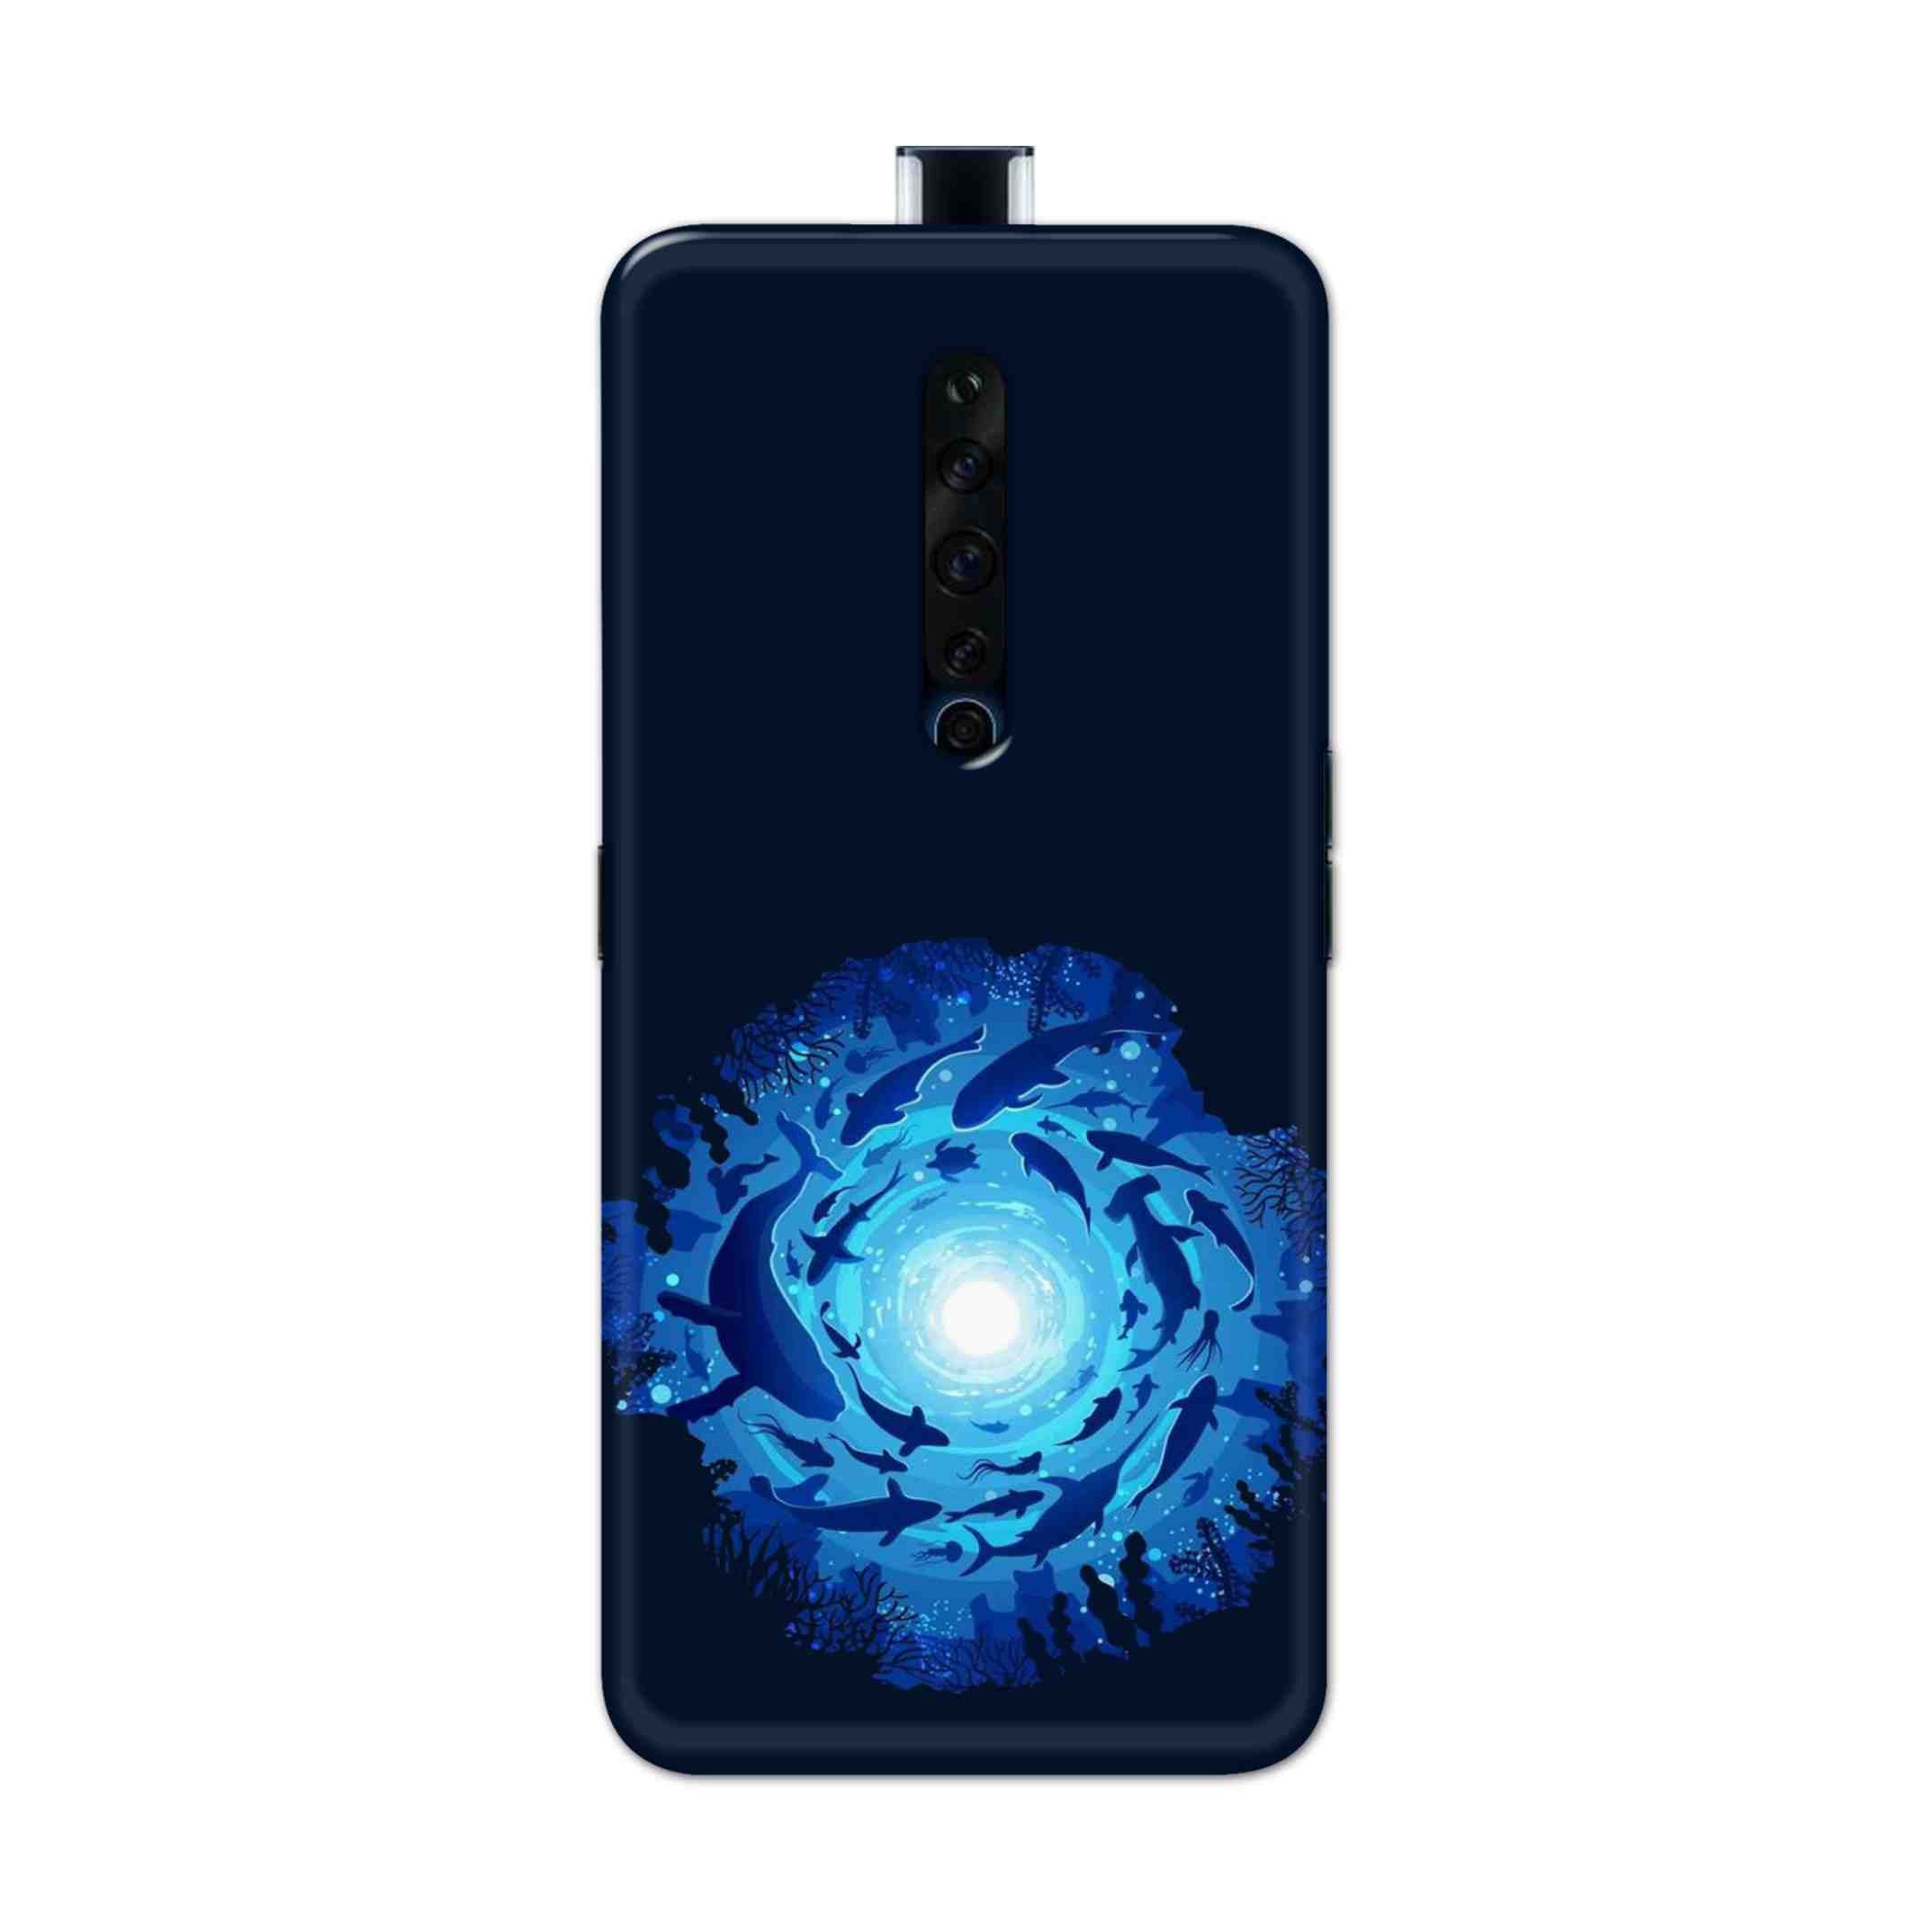 Buy Blue Whale Hard Back Mobile Phone Case Cover For Oppo Reno 2Z Online